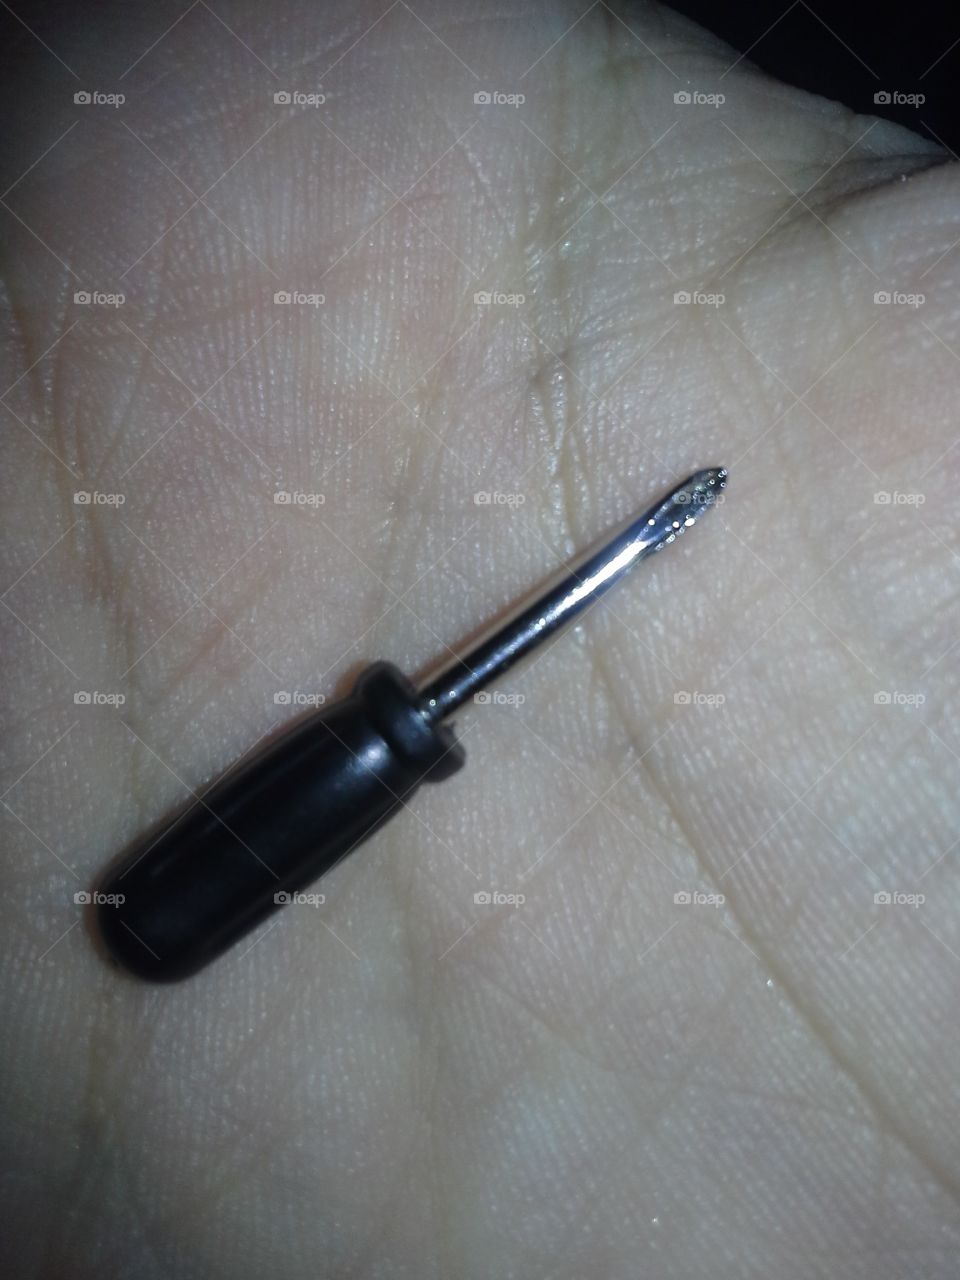 the tiny screwdriver who wasn't a toy